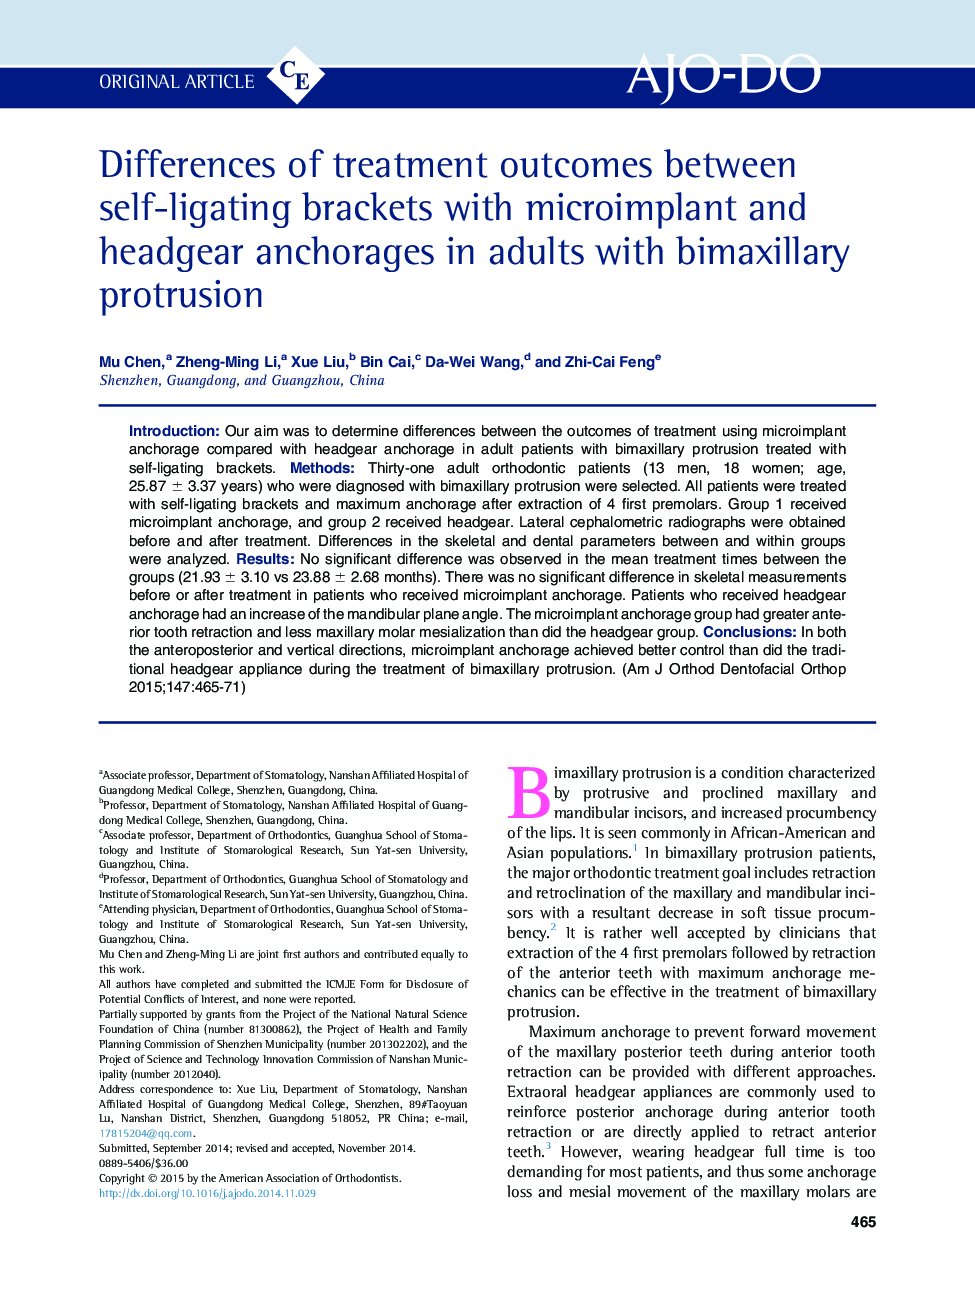 Differences of treatment outcomes between self-ligating brackets with microimplant and headgear anchorages in adults with bimaxillary protrusion 